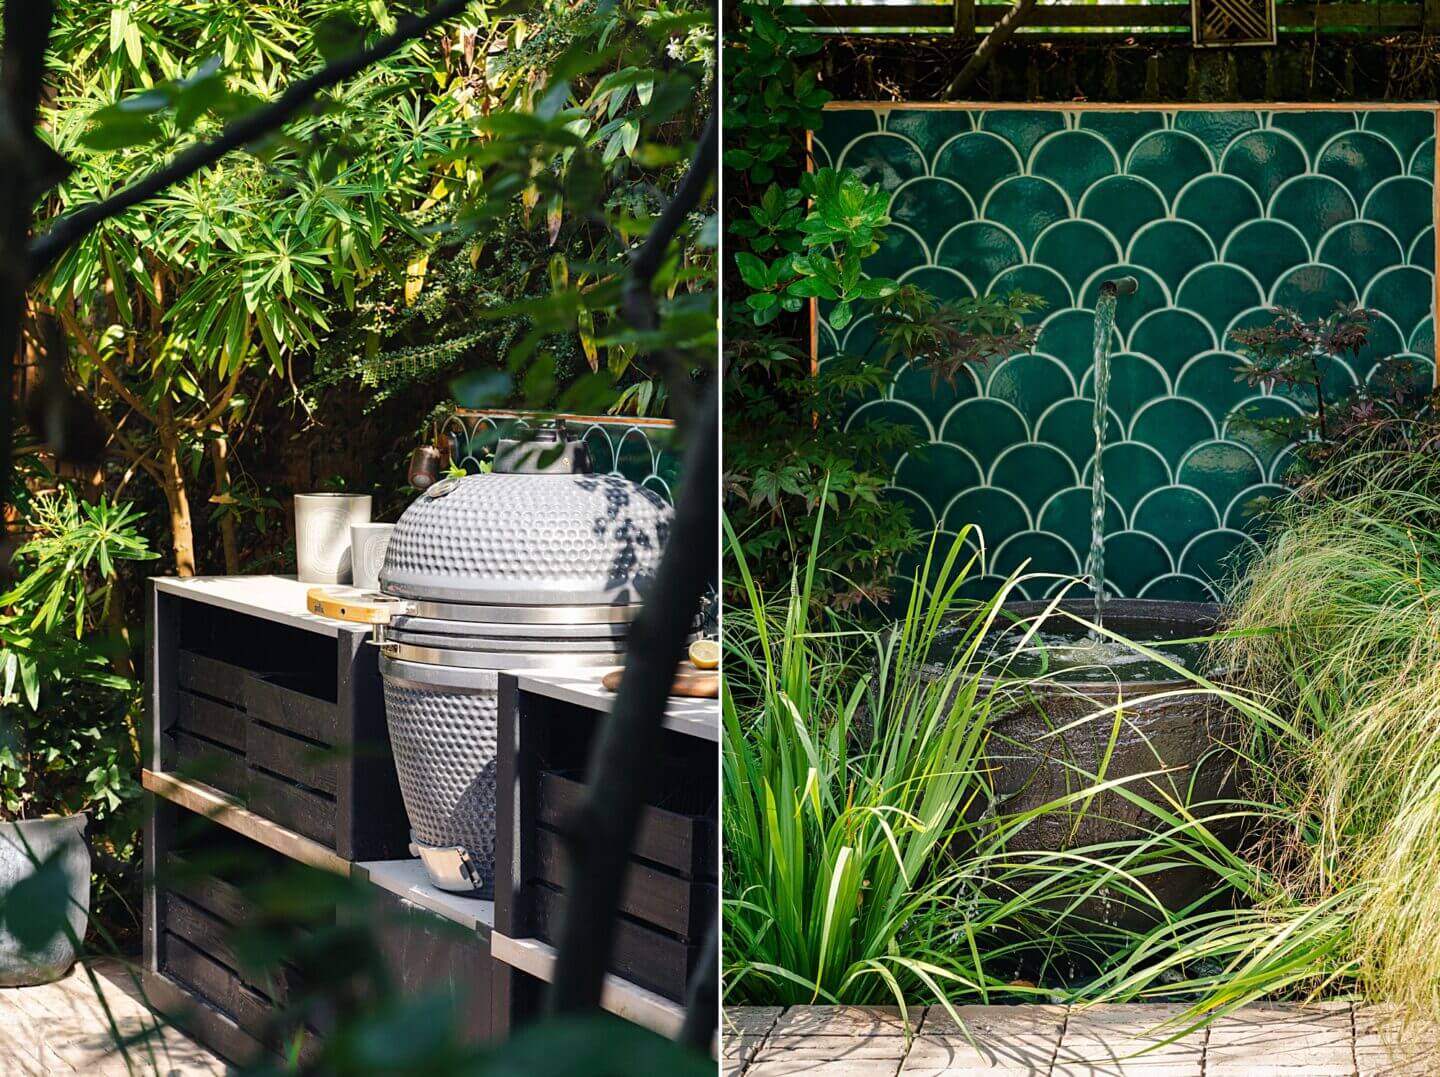 Art Deco style green tiled garden design with outdoor kitchen and water feature designed by Pollyanna Wilkinson